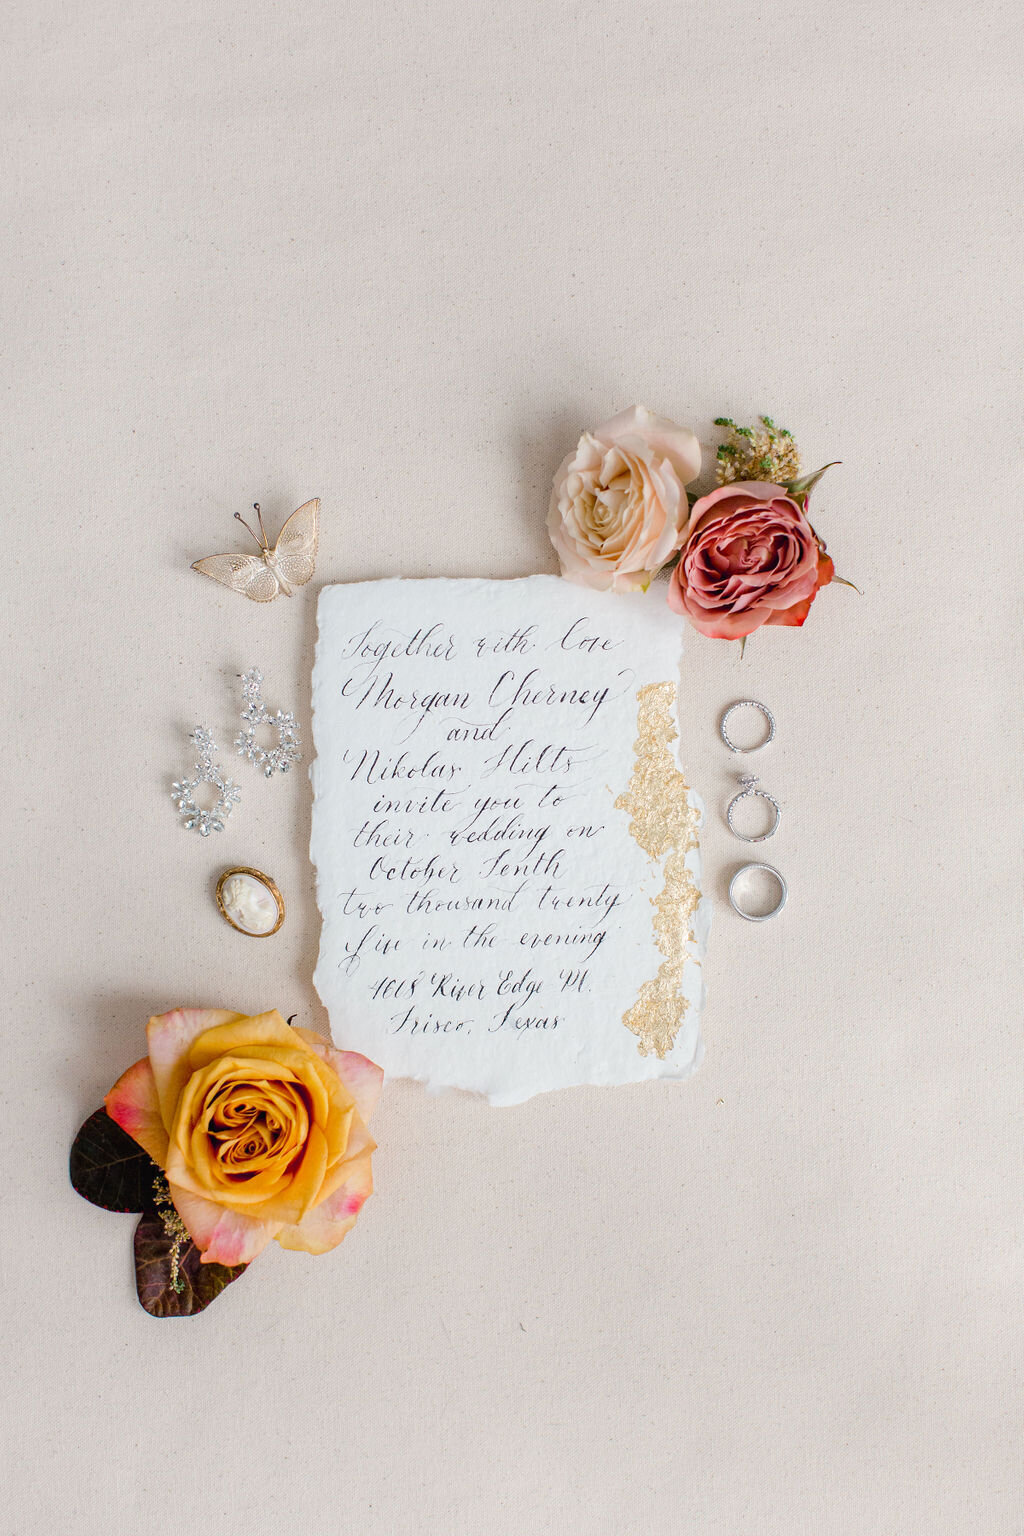 Wedding Details at Intimate Fort Worth Wedding with Garden Style Florals by Vella Nest Floral Designs